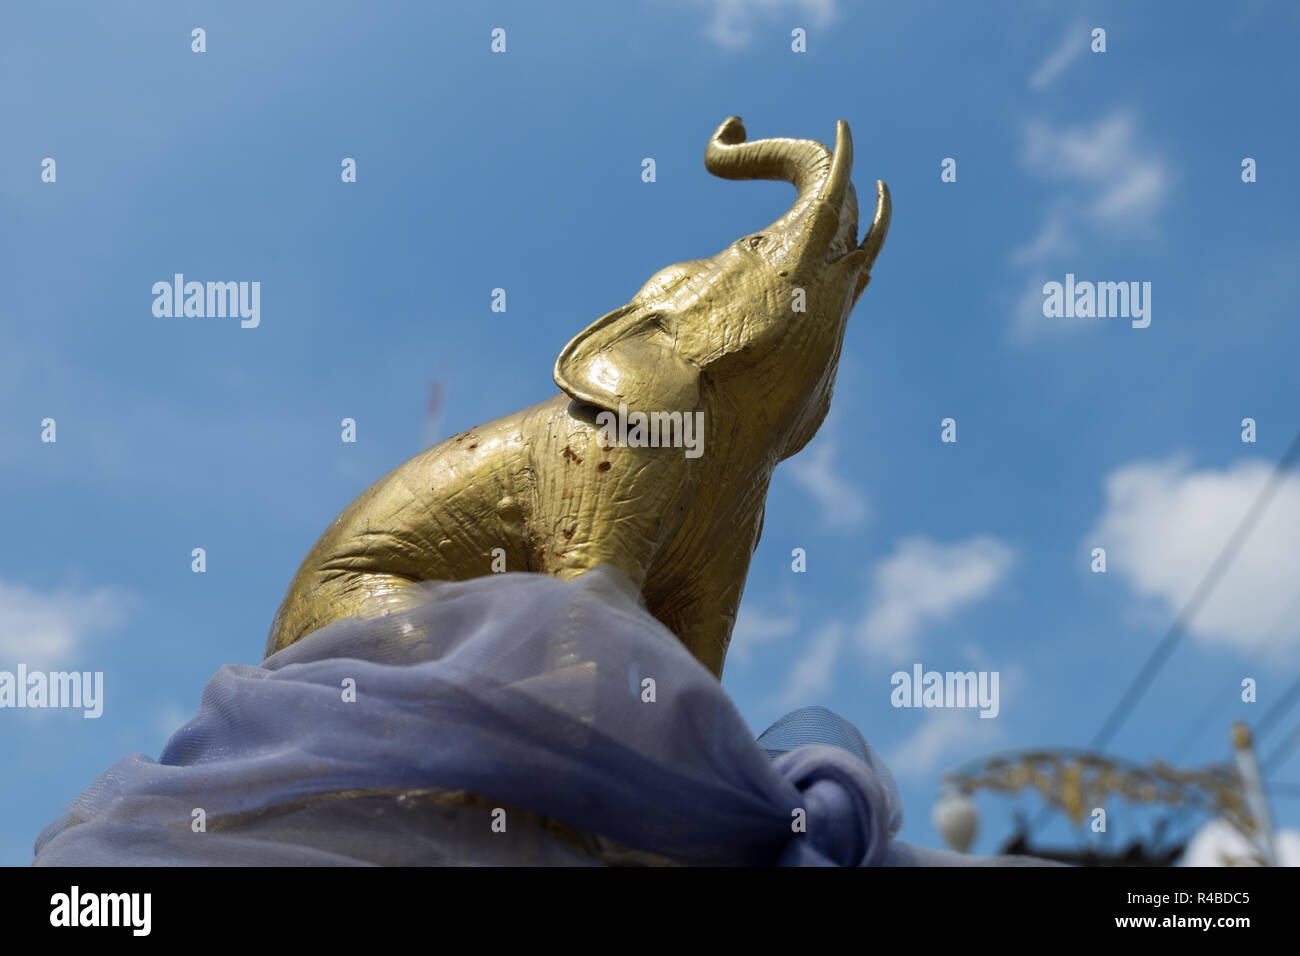 A small, gold elephant at a religious shrine in Hat Yai, Thailand. Stock Photo